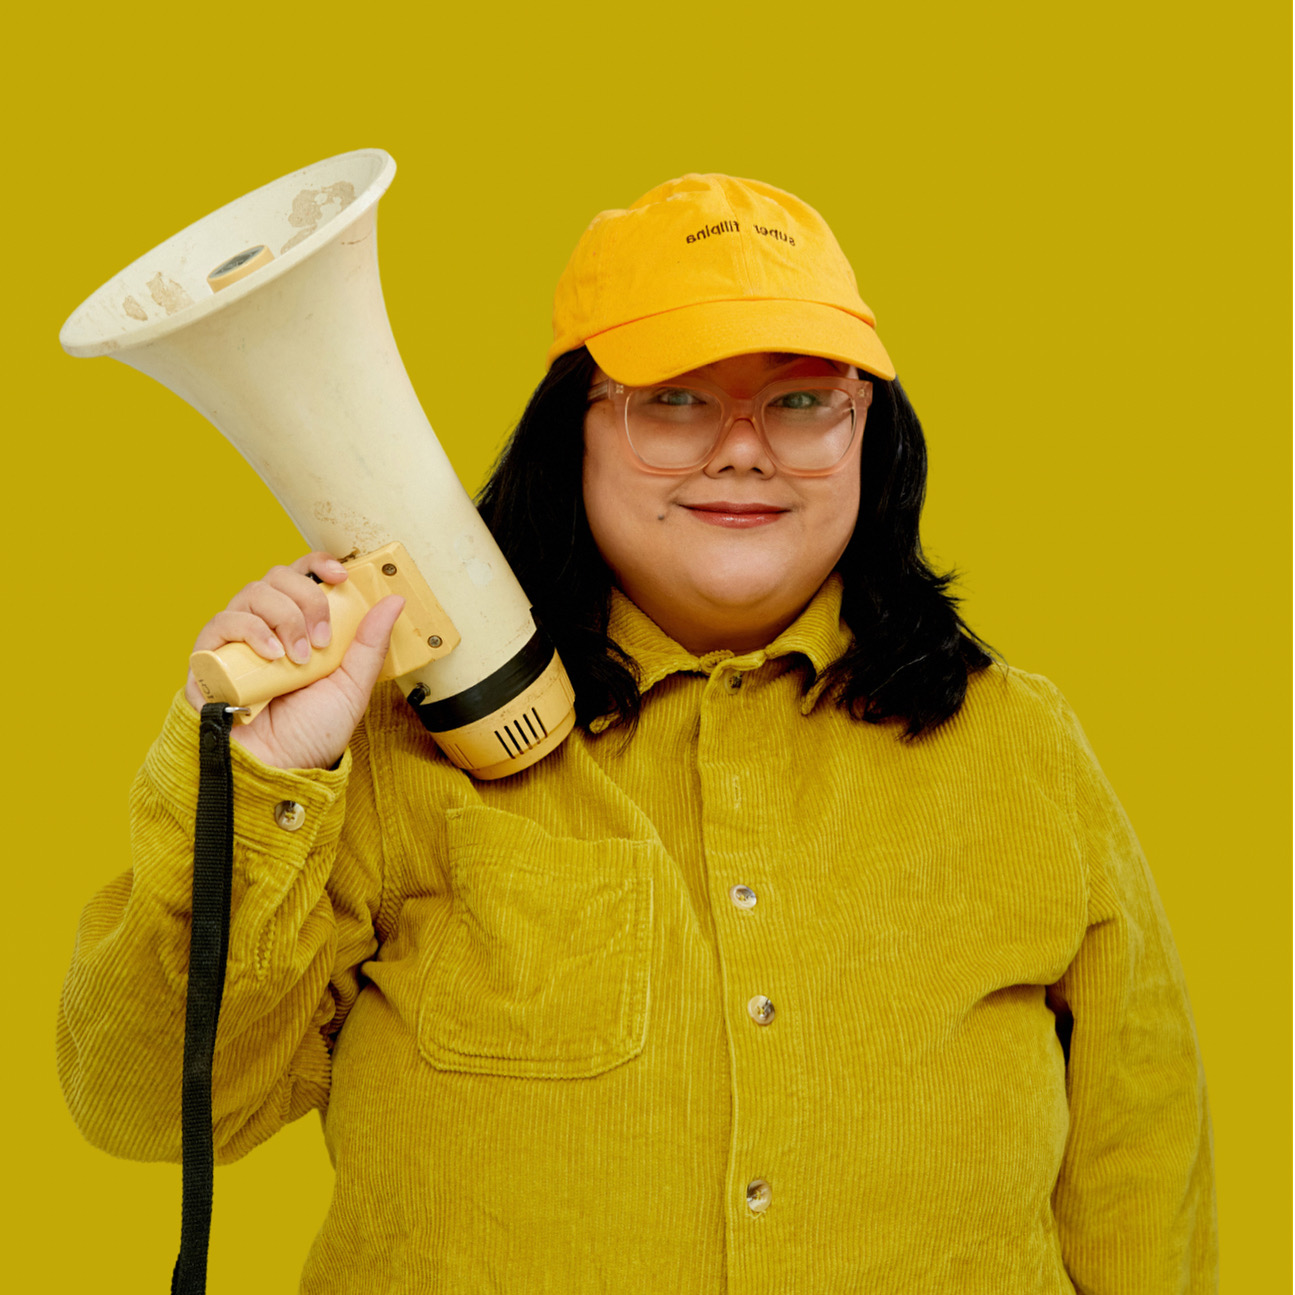 Alia is a Filipina woman standing in front of a mustard yellow background. She has black, shoulder-length hair, and is wearing glasses with light pink, transparent frames. She is wearing a mustard yellow corduroy buttoned up shirt. She is wearing a bright yellow cap that says “super filipina” in black. She is smiling and holding a megaphone.